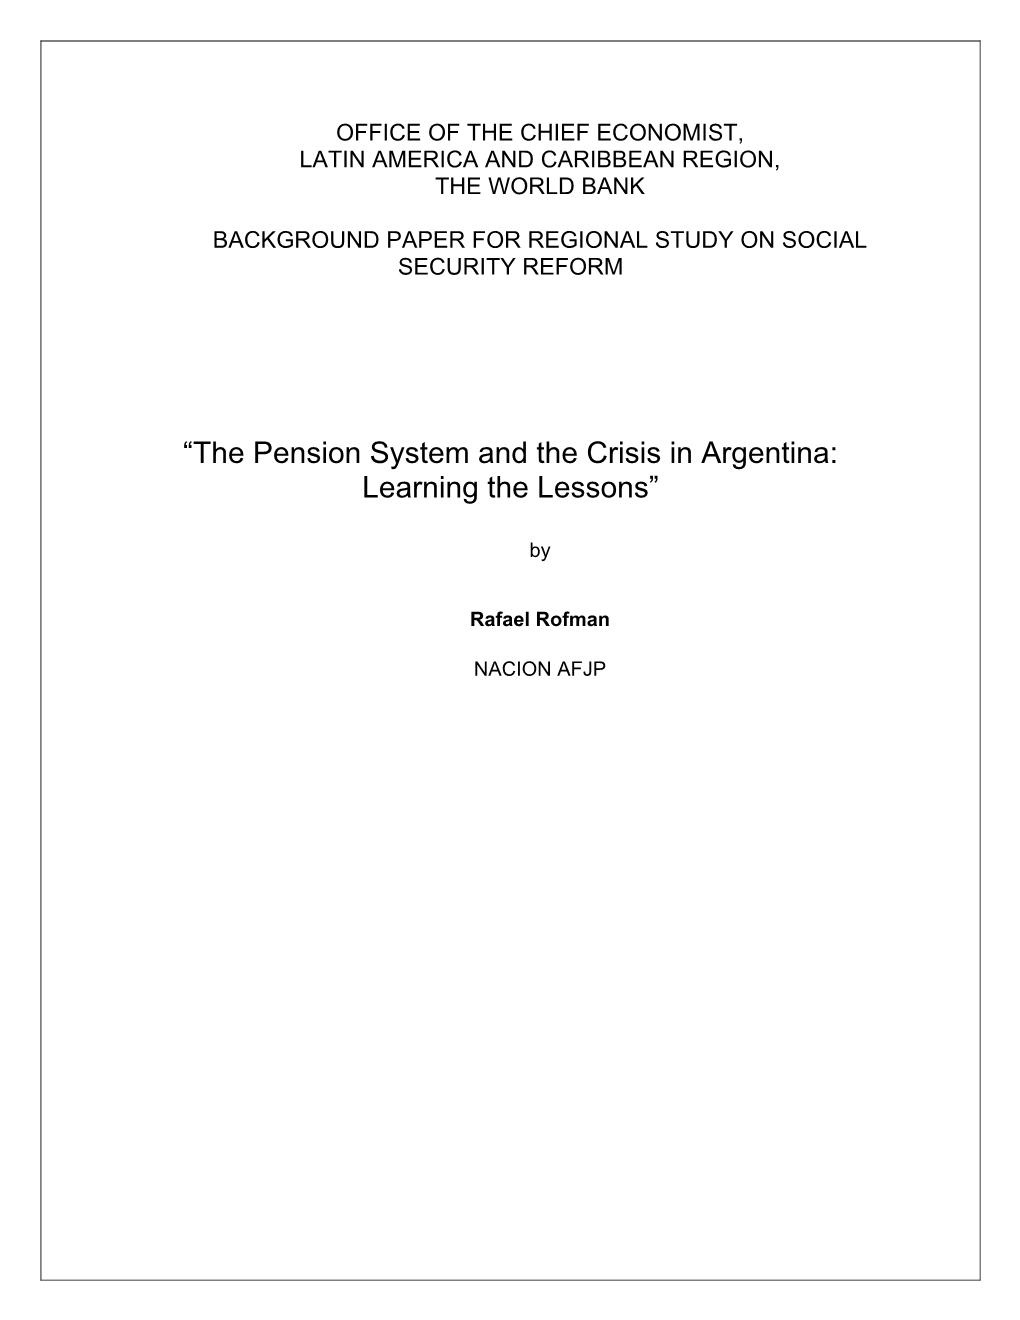 The Pension System and the Crisis in Argentina: Learning the Lessons”